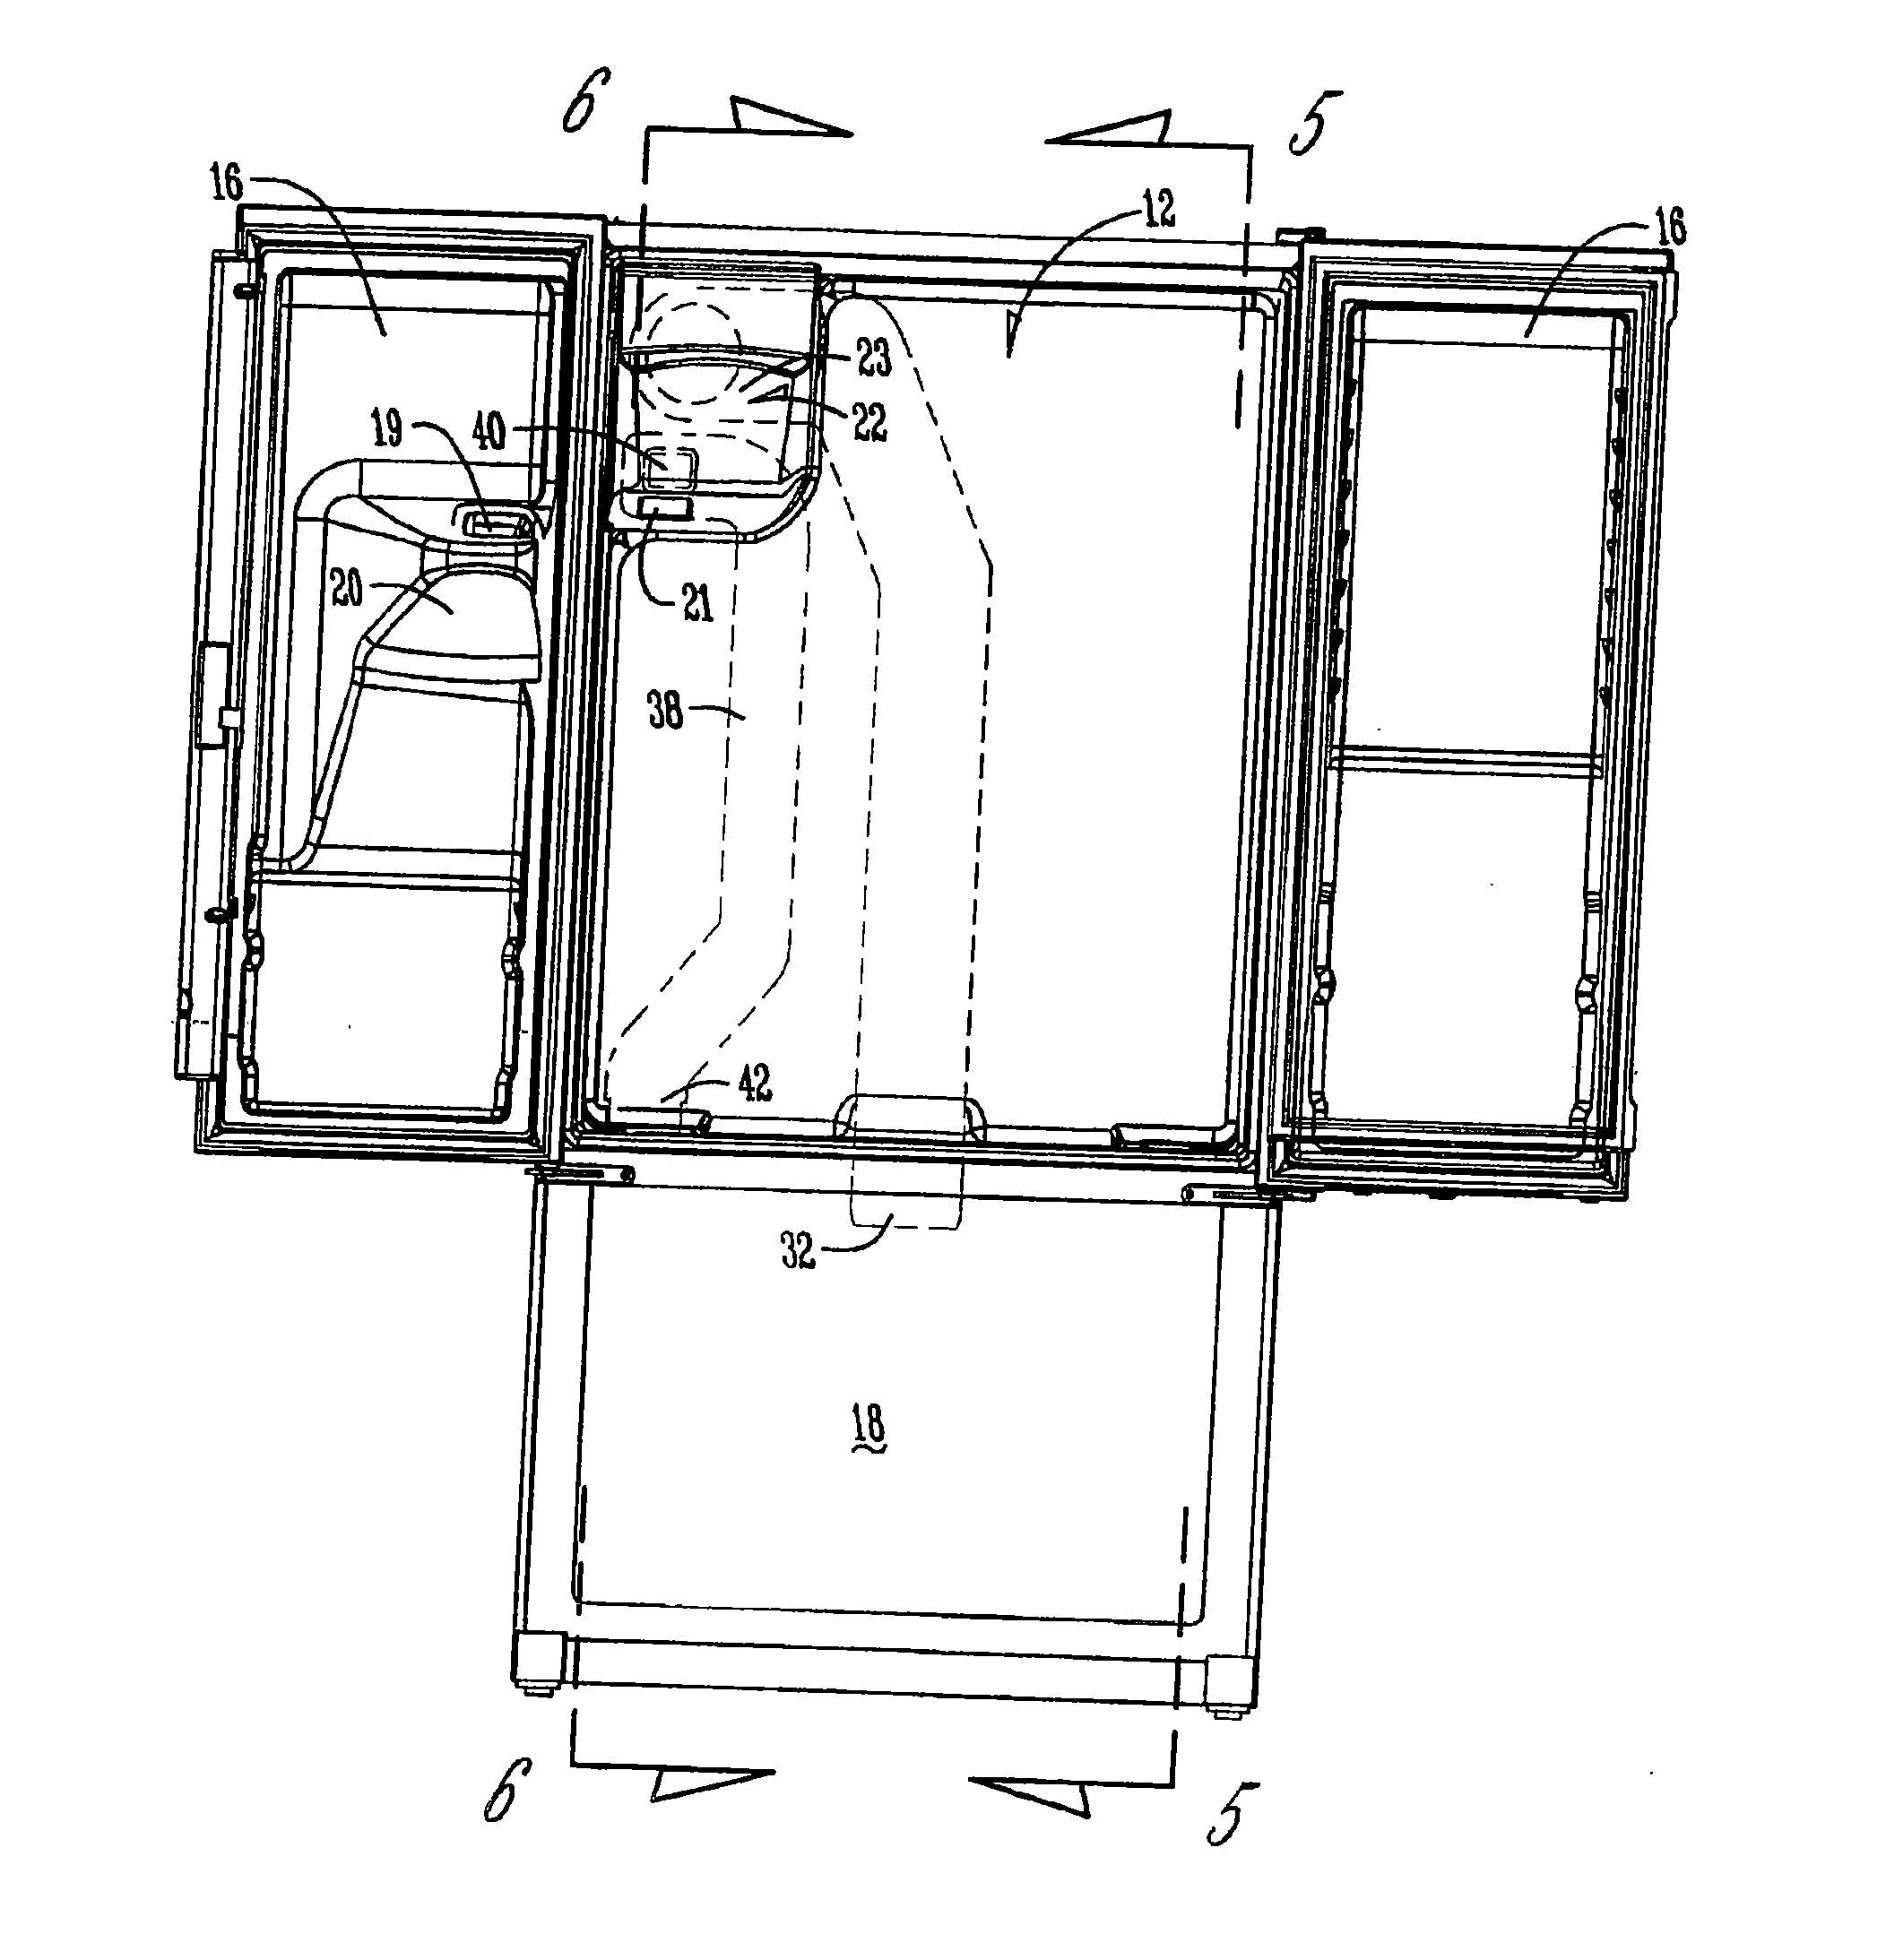 Refrigerator with improved water fill tube for ice maker